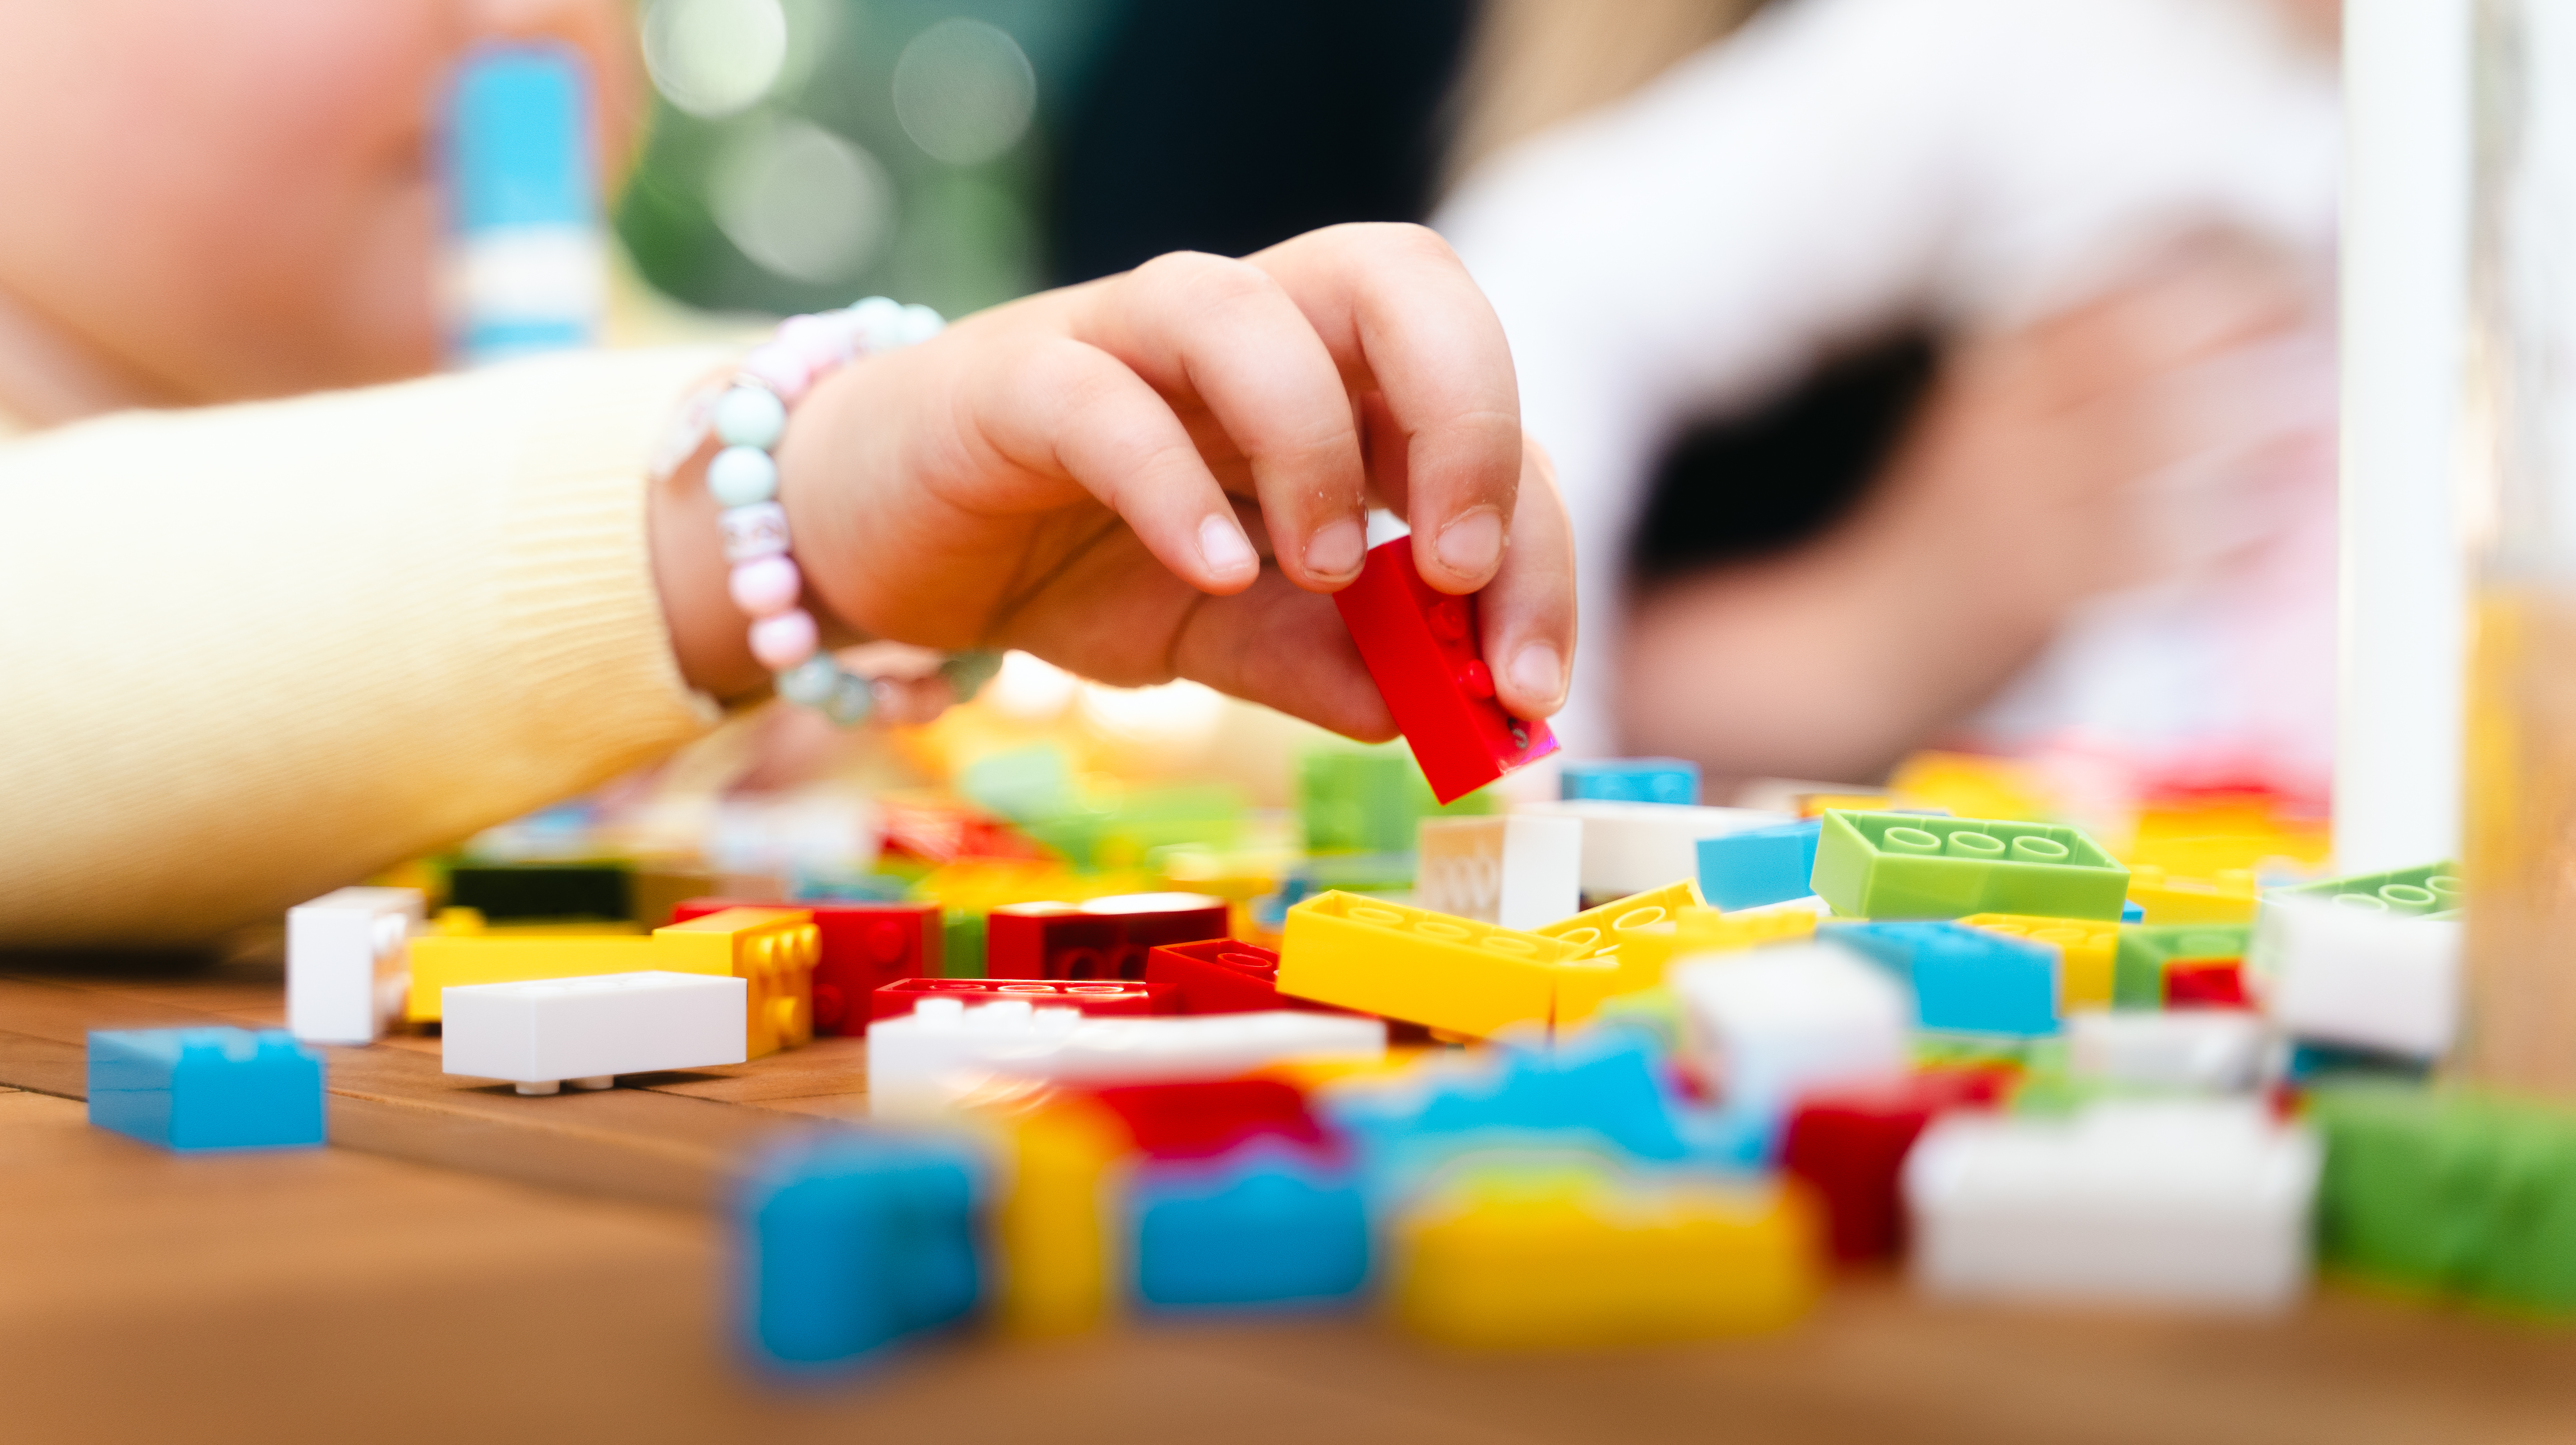 A child’s hand plays with Lego Braille Bricks on a garden table.